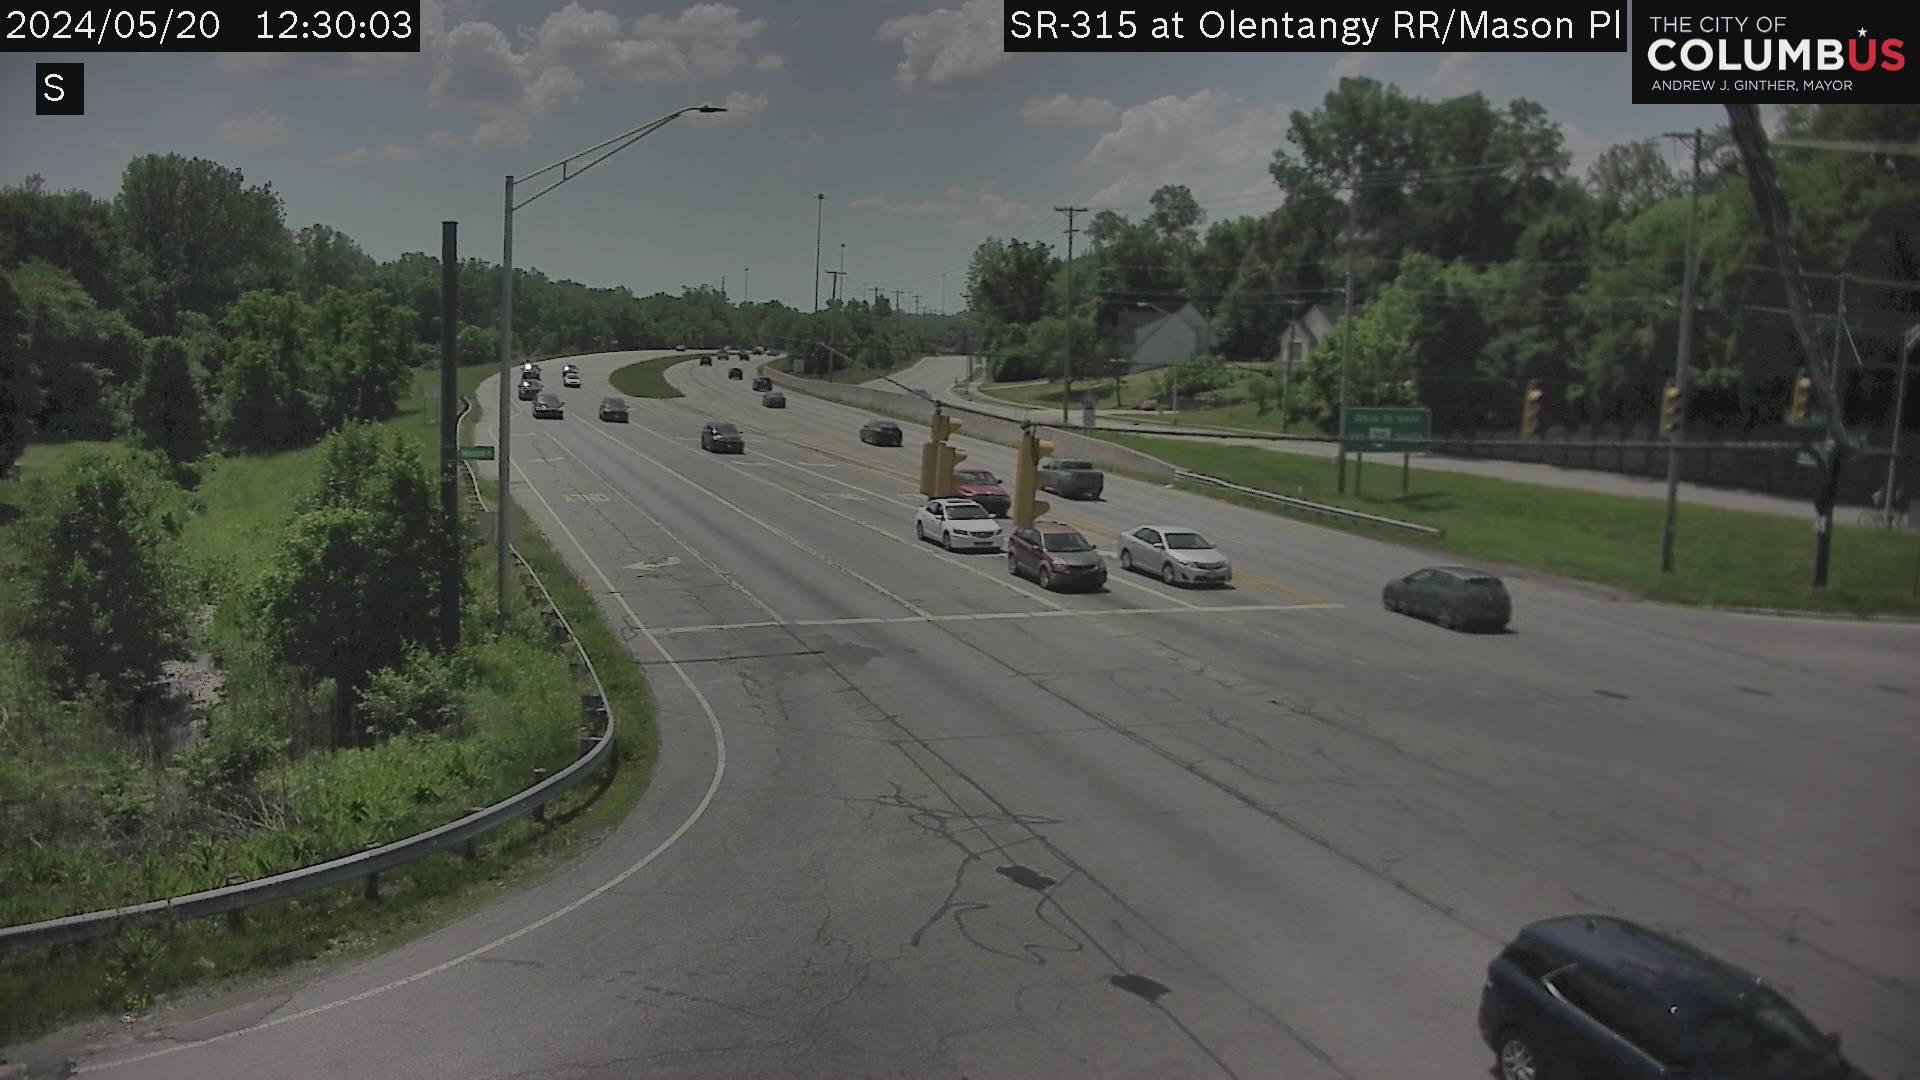 Traffic Cam Worthington Hills: City of Columbus) Olentangy River Rd at Mason Pl and SR-315 Player